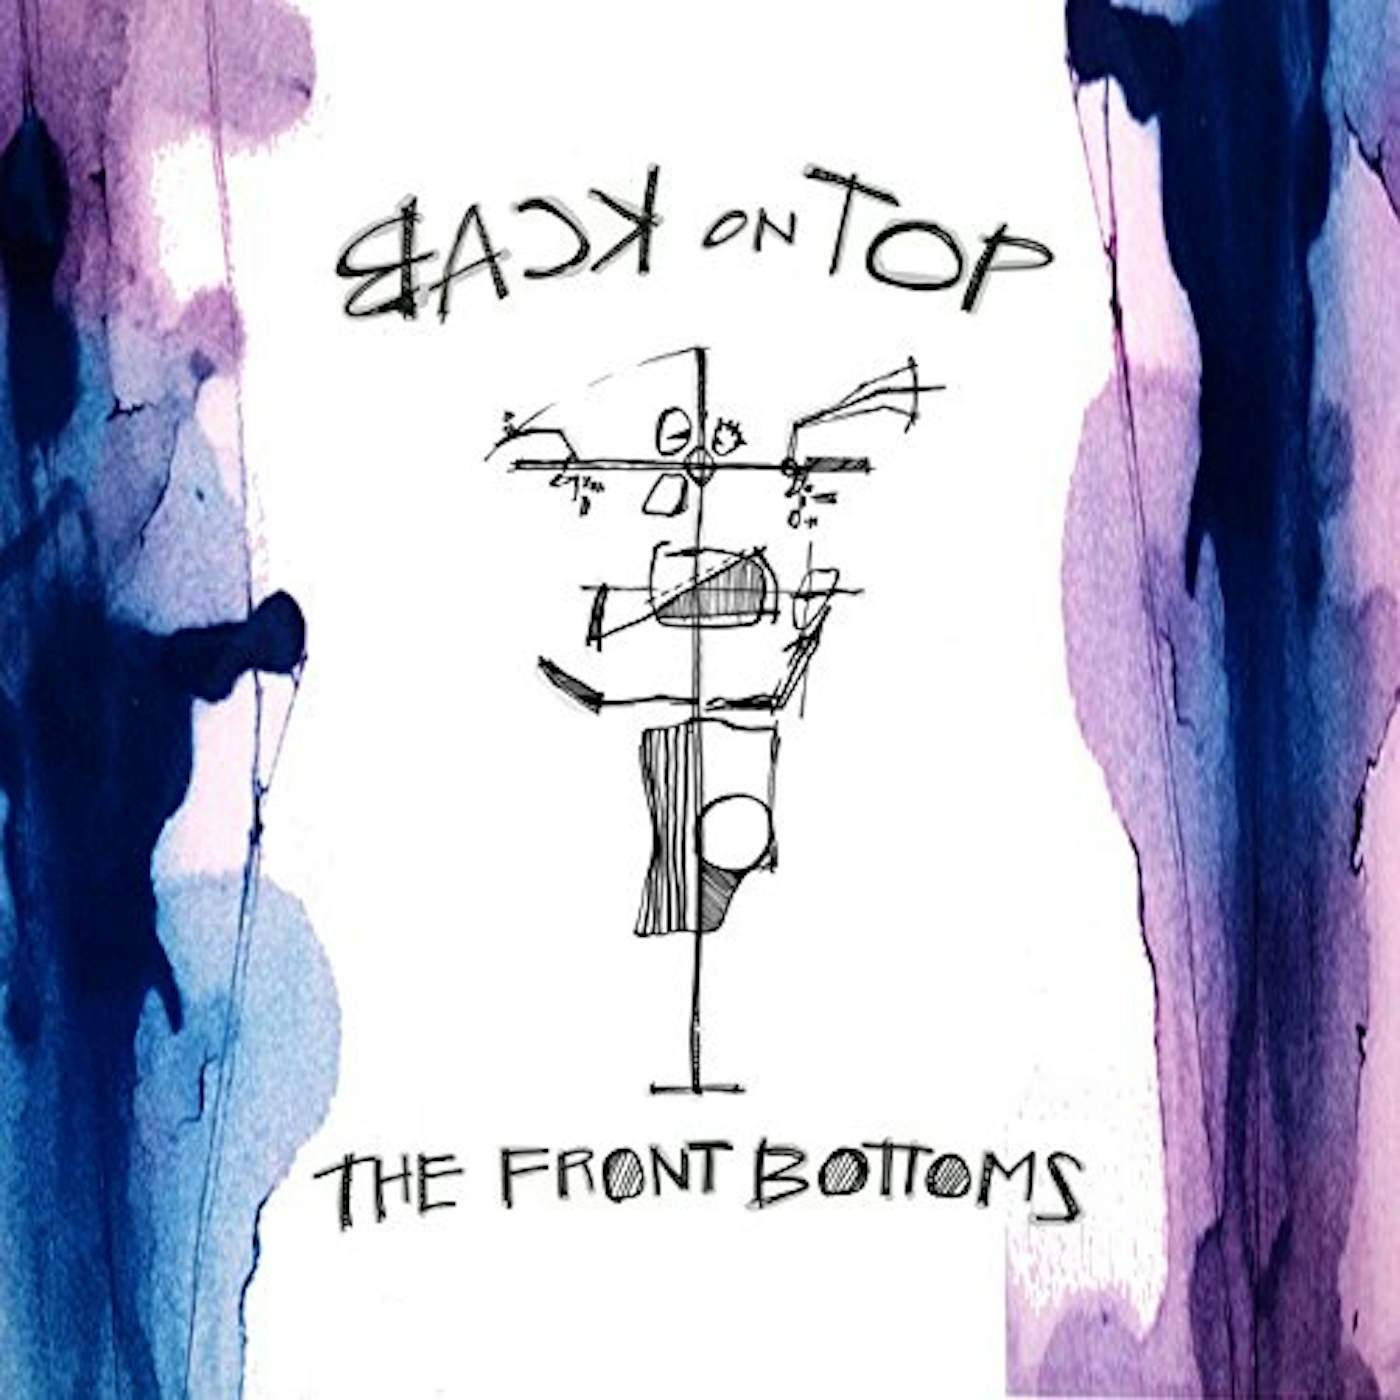 The Front Bottoms BACK ON TOP (X) (DL CARD) Vinyl Record